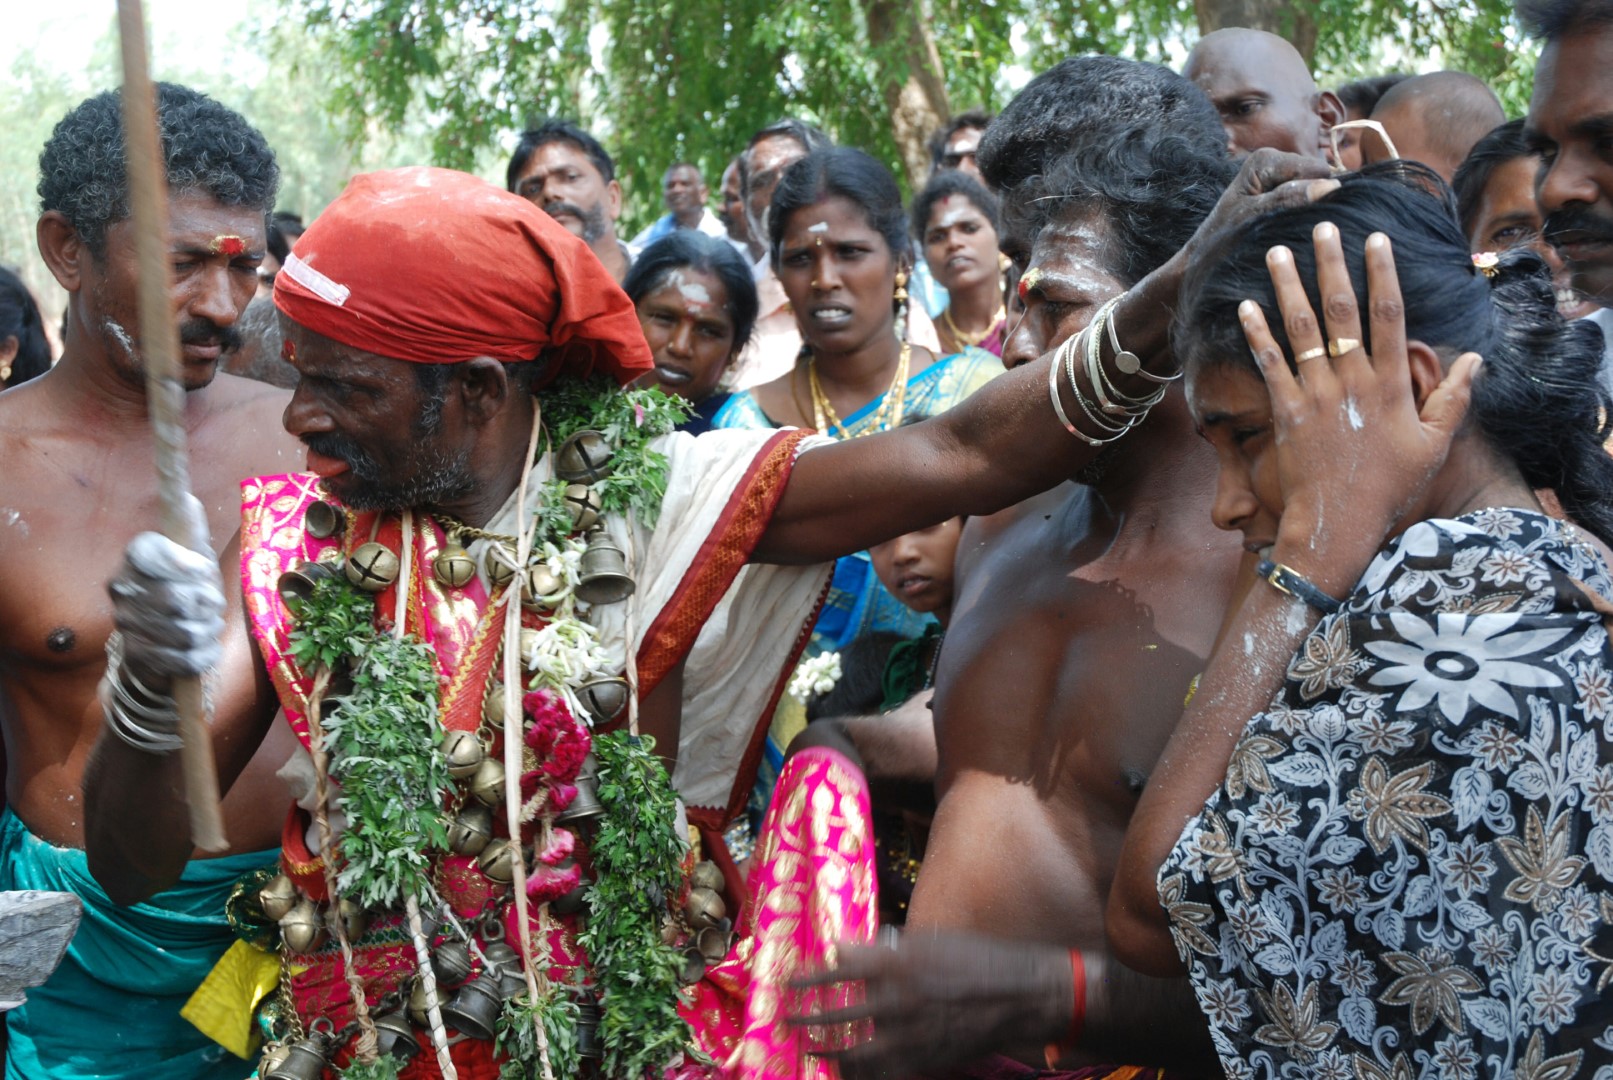 <span style="font-weight:normal;">Sappani Karuppu is a particularly fierce god: demons and other evil spirits are no match for him. Some devotees, like this woman, seek his intervention if they are plagued by malevolent forces.</span>